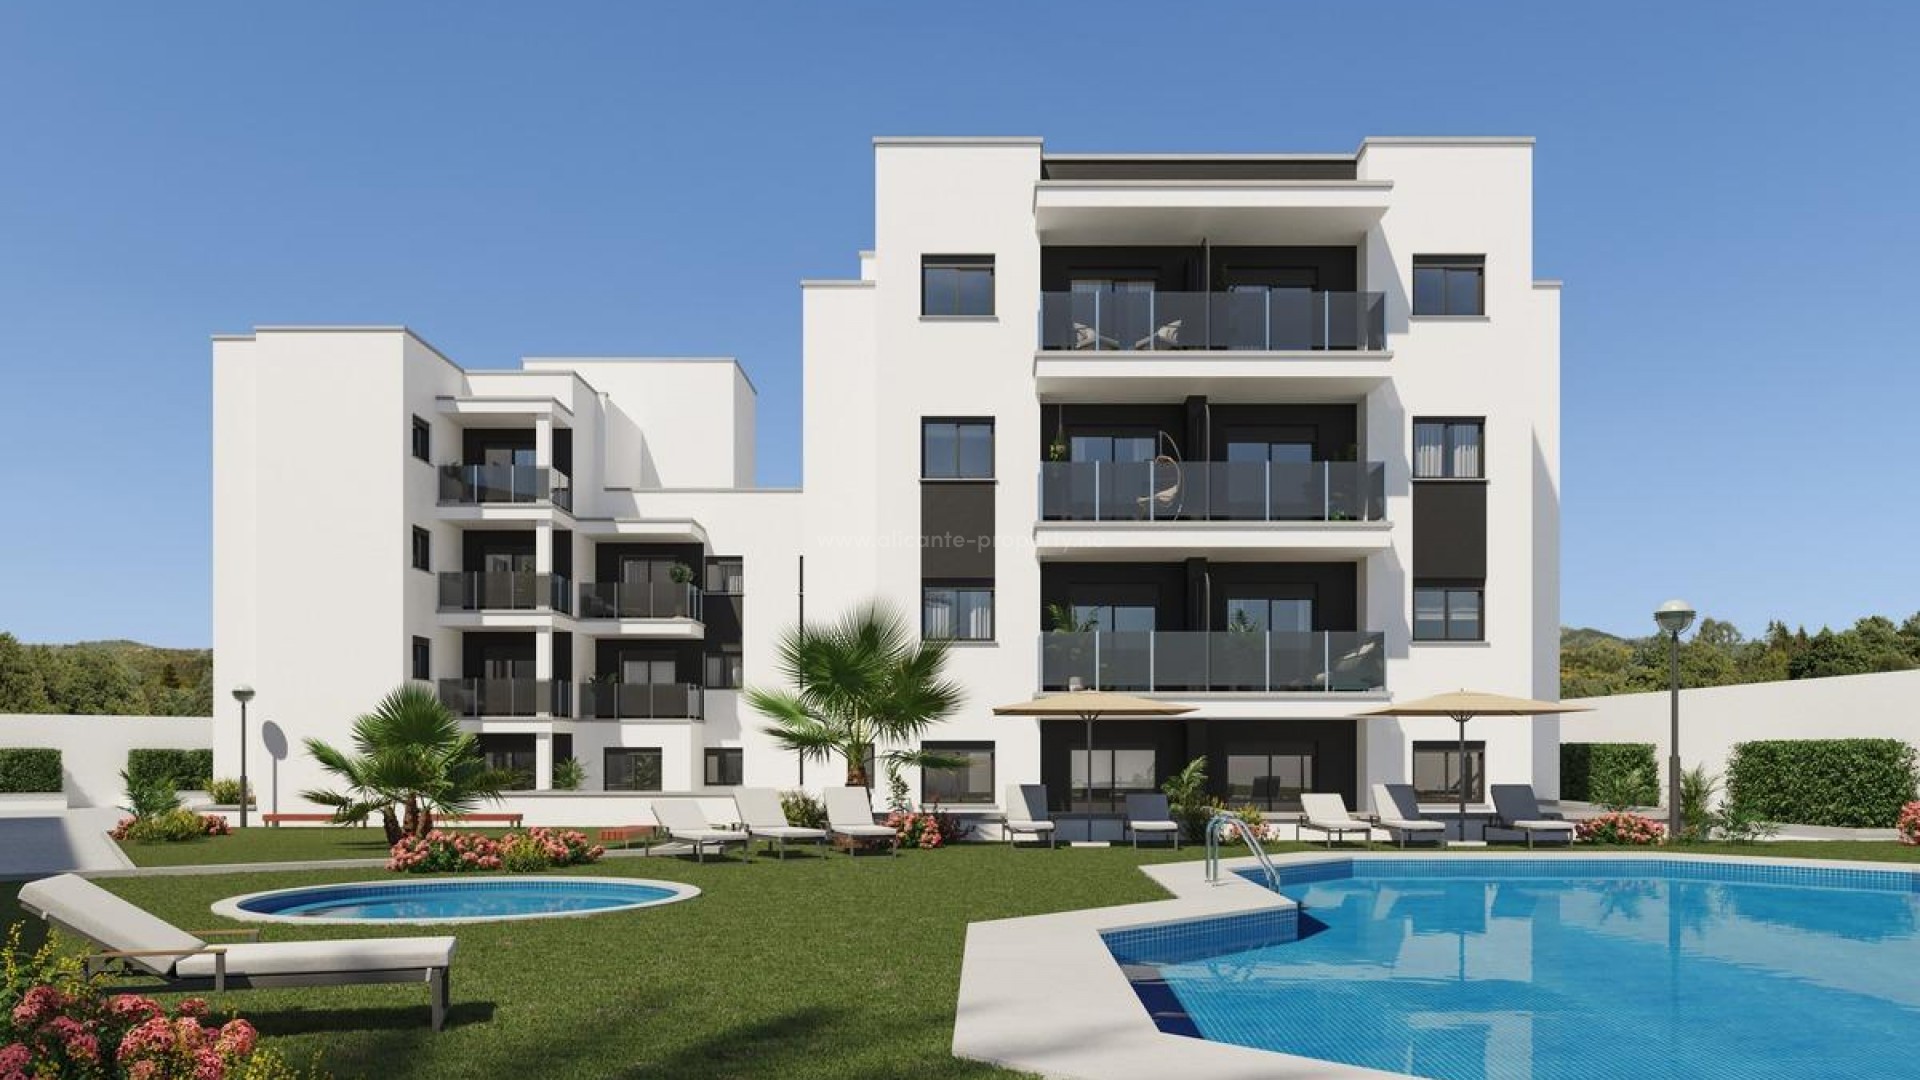 Brand new residential complex with apartments/penthouses in Villajoyosa, 2/3 bedrooms, 2 bathrooms, terraces, communal areas with pool, all with parking